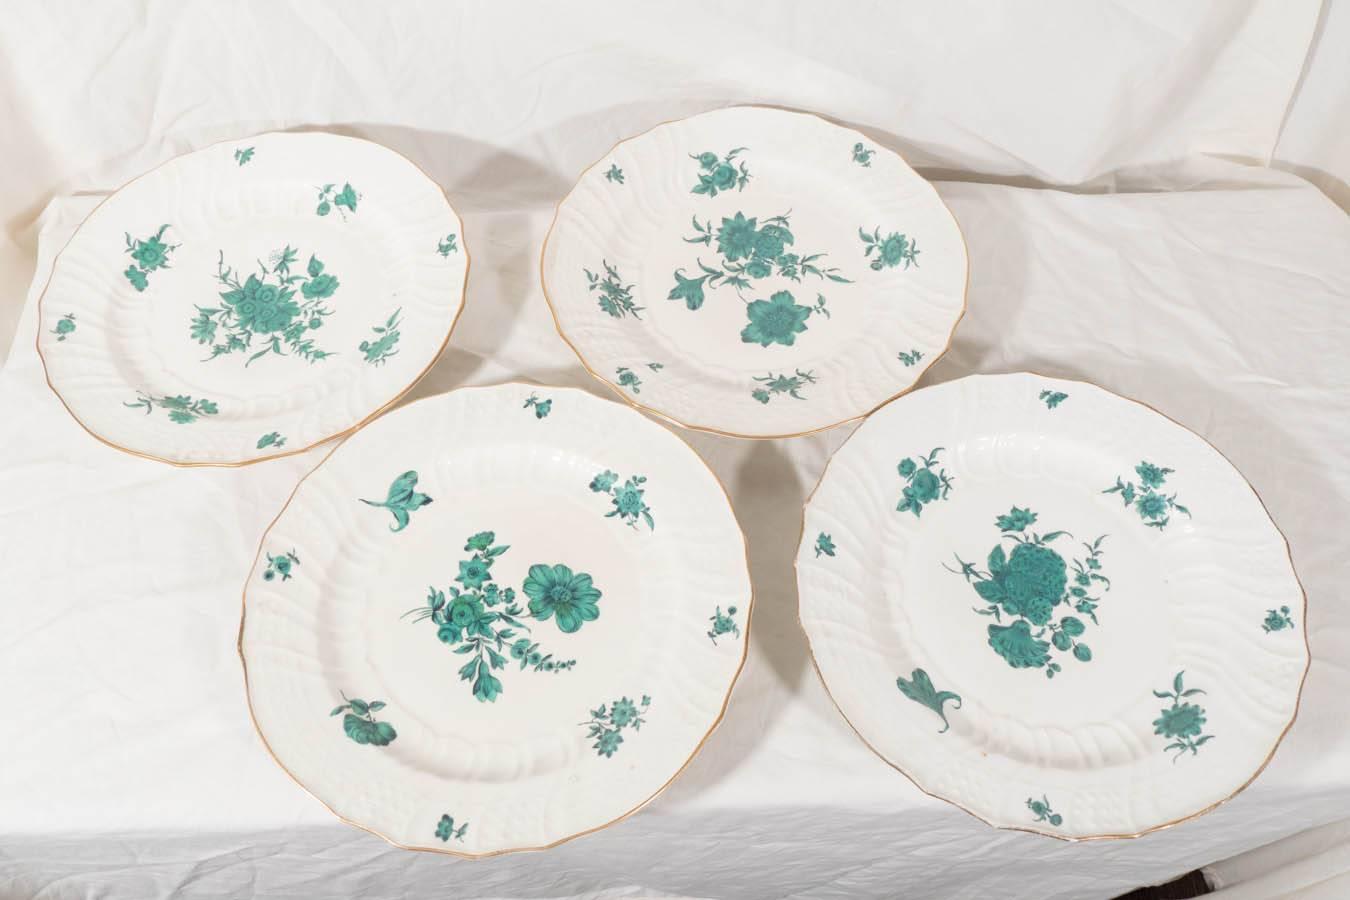 Porcelain Early 19th Century Set of German Dishes with Bouquets of Green Flowers